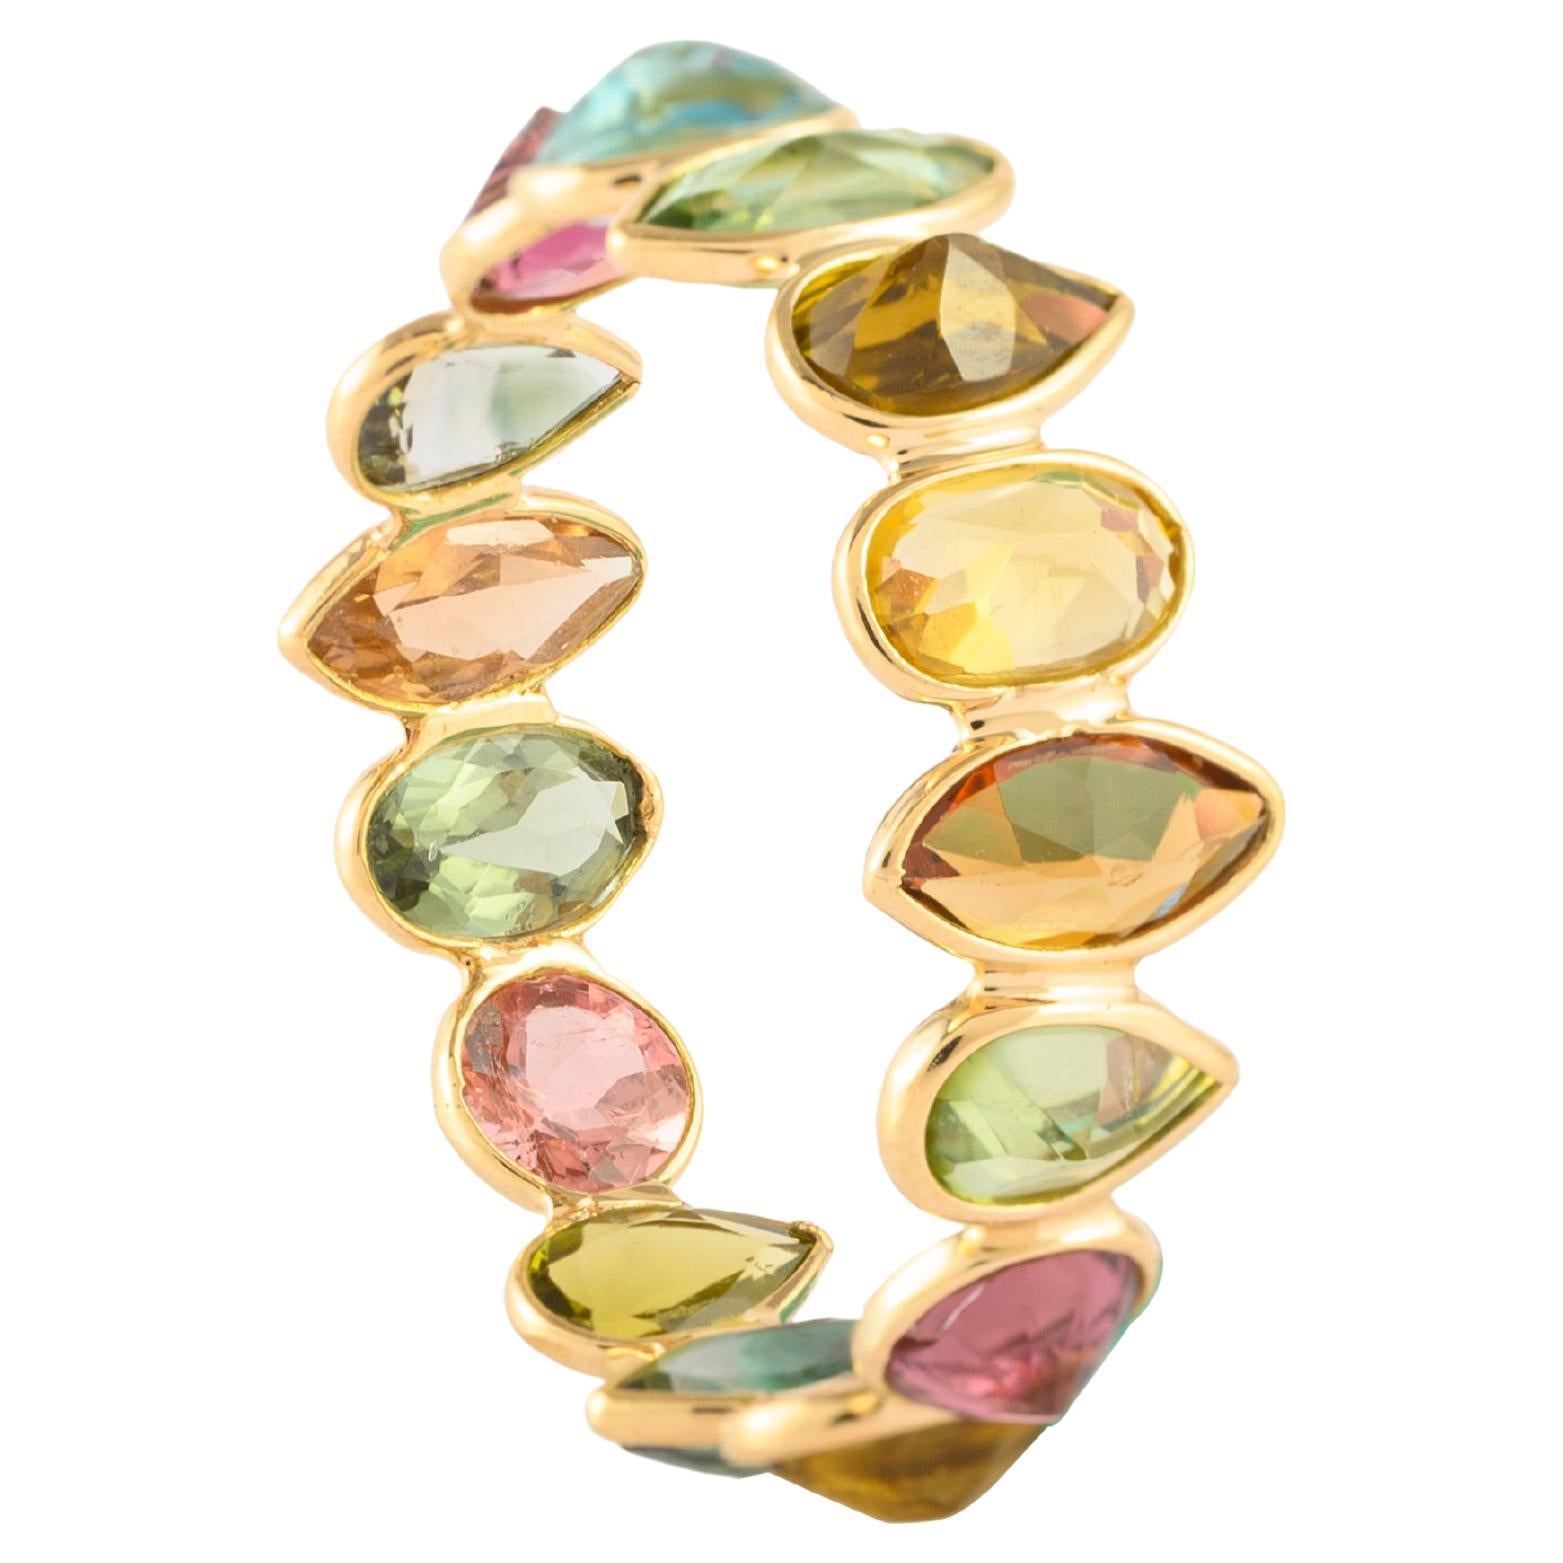 For Sale:  Elegant 3.64ct Multi Tourmaline Full Eternity Band Ring in 18k Solid Yellow Gold